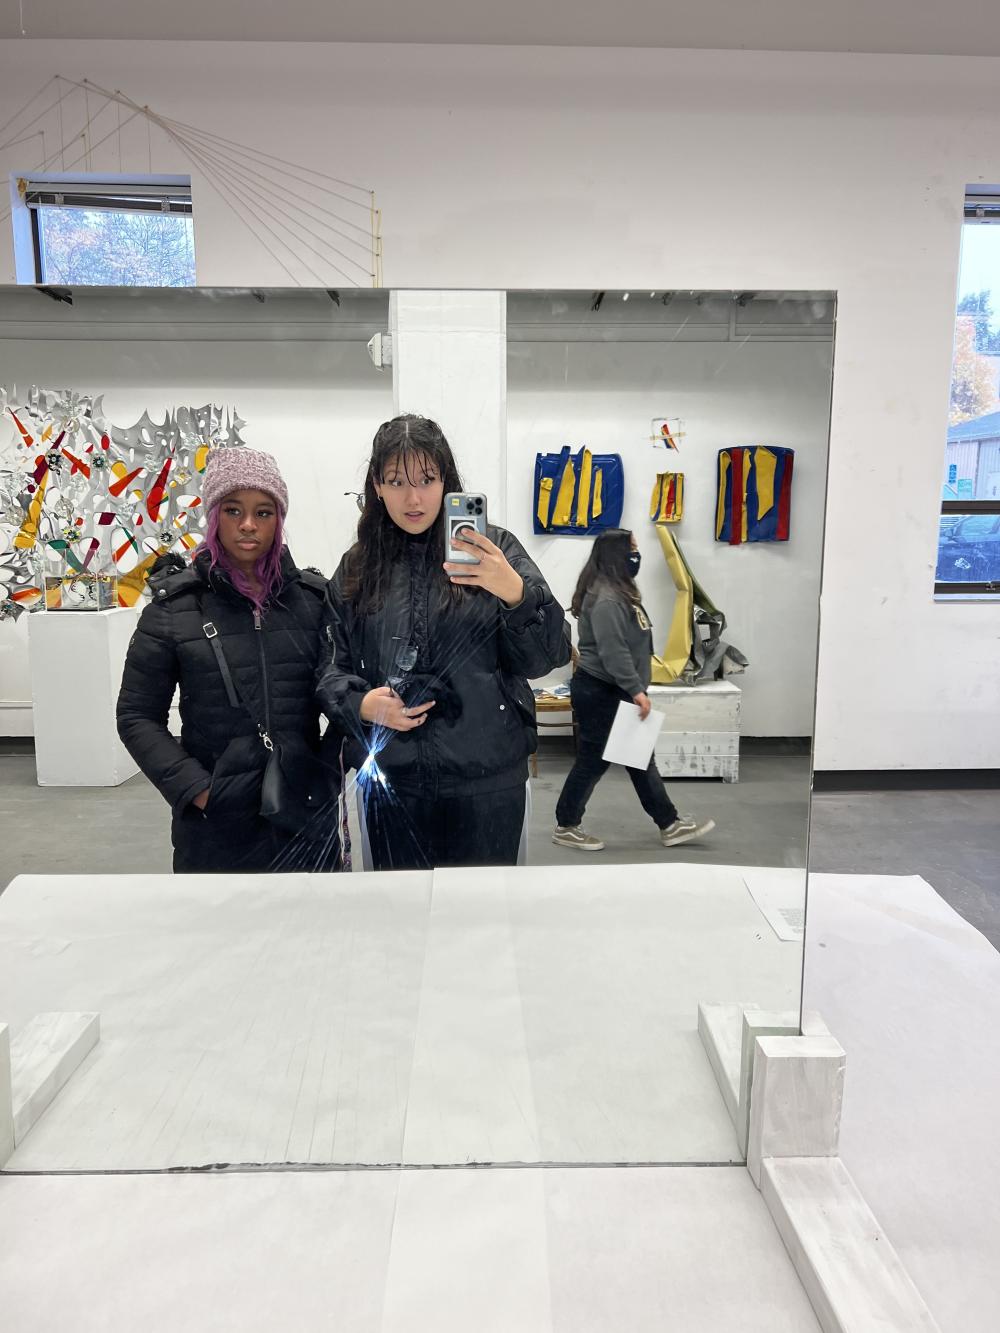 Zoe Vollmer and friend Lee stand in front of a mirror at an art exhibit.